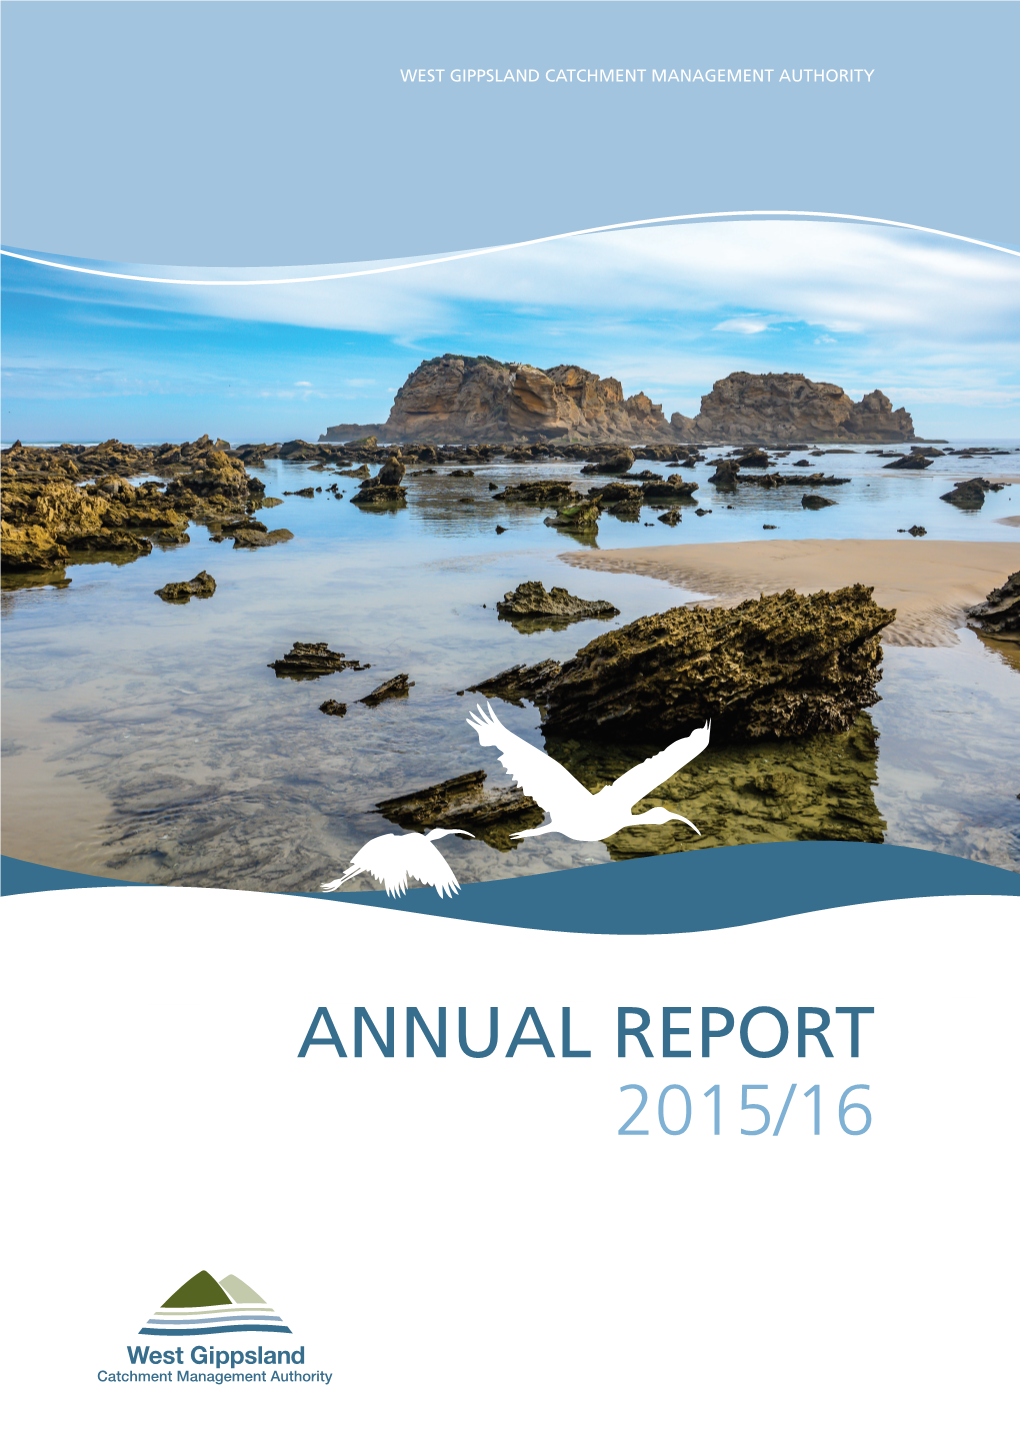 ANNUAL REPORT 2015/16 As a Leader in Natural Resource Management We Will Inspire and Facilitate Partnerships and Action to Achieve Improved Catchment Health